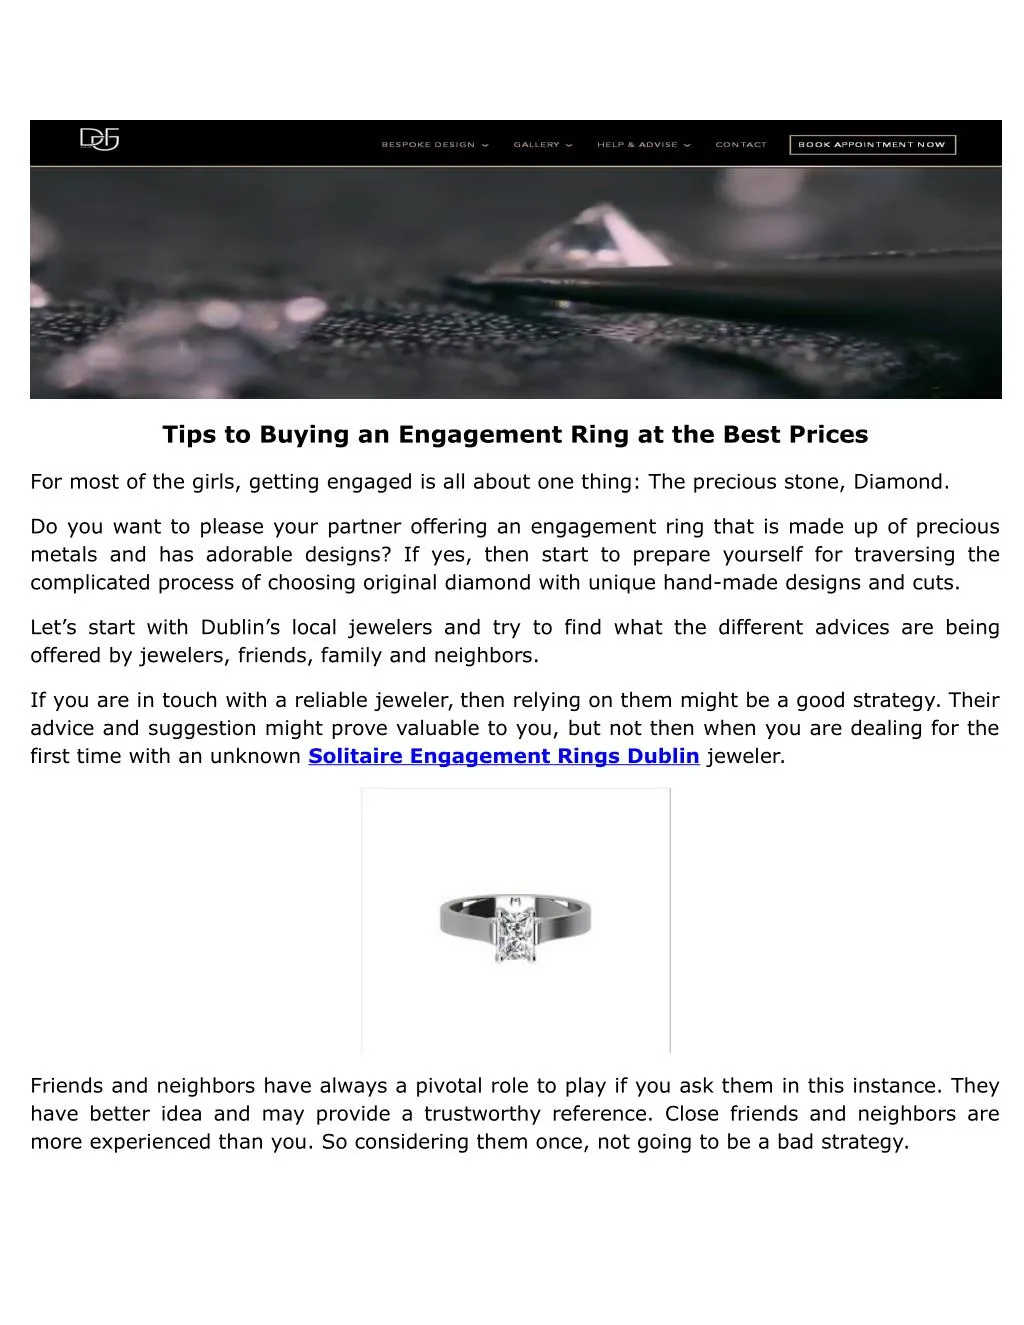 tips to buying an engagement ring at the best